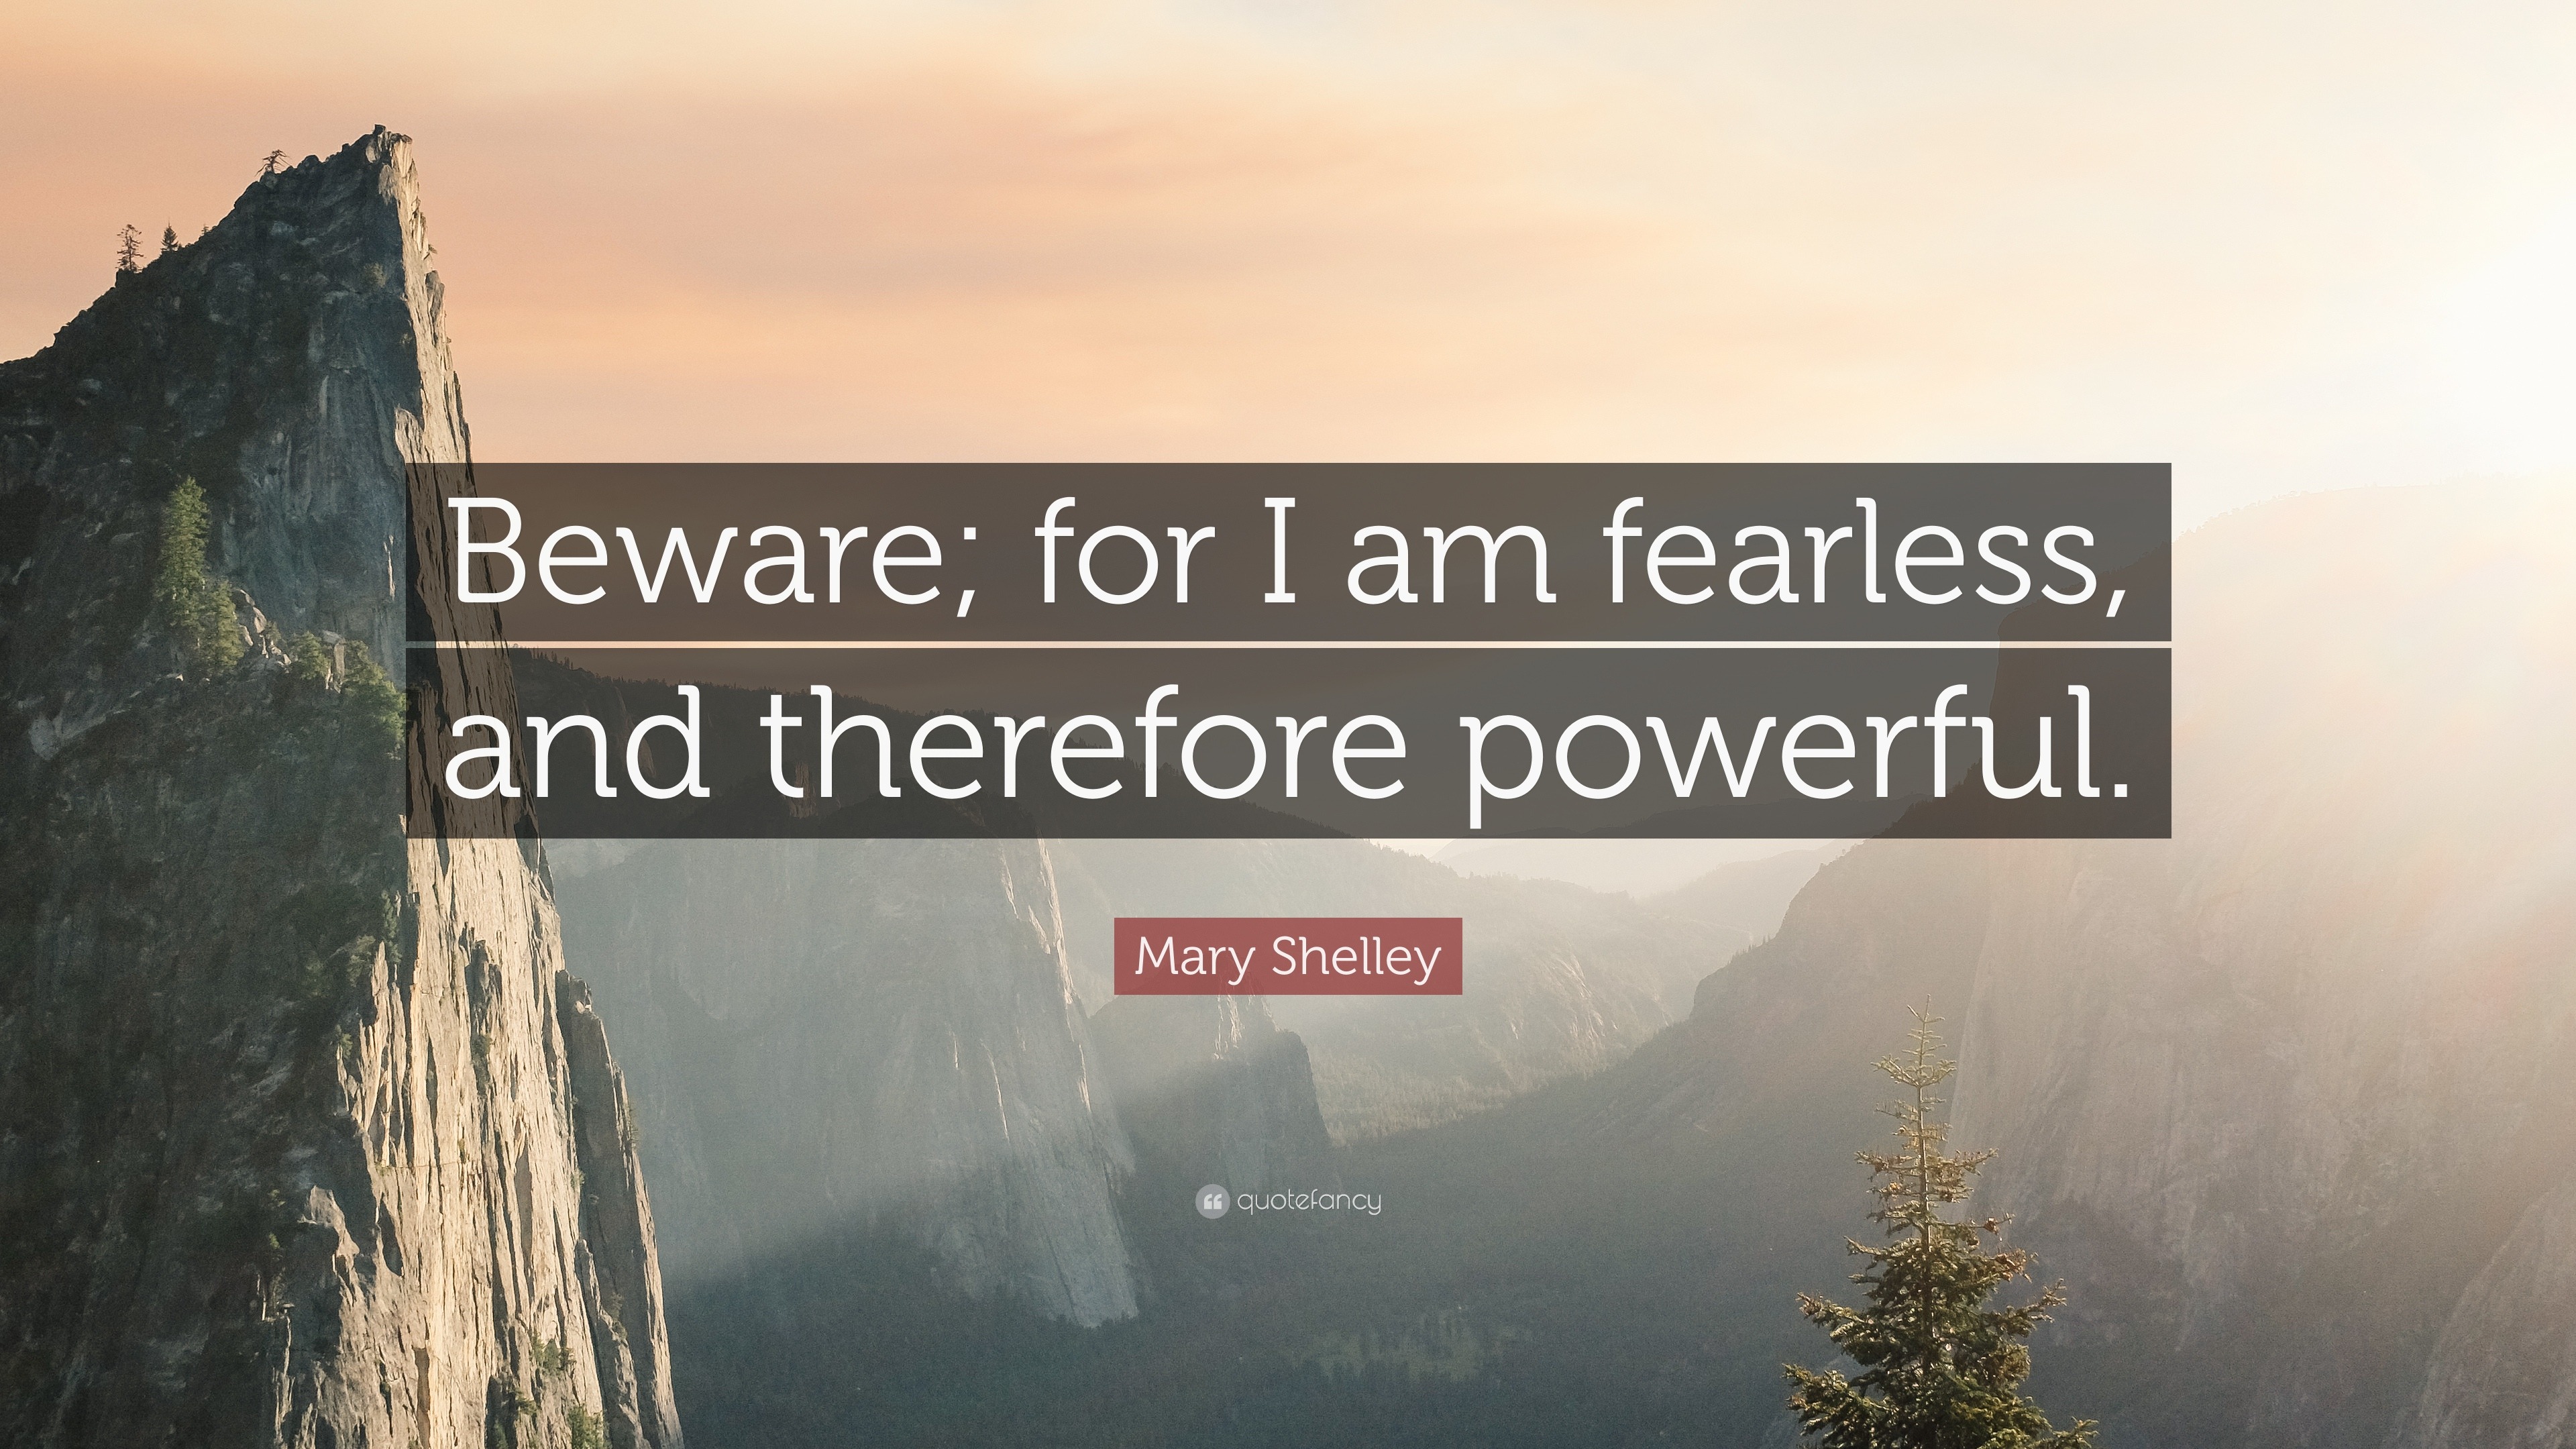 Mary Shelley Quote: “Beware; for I am fearless, and therefore powerful